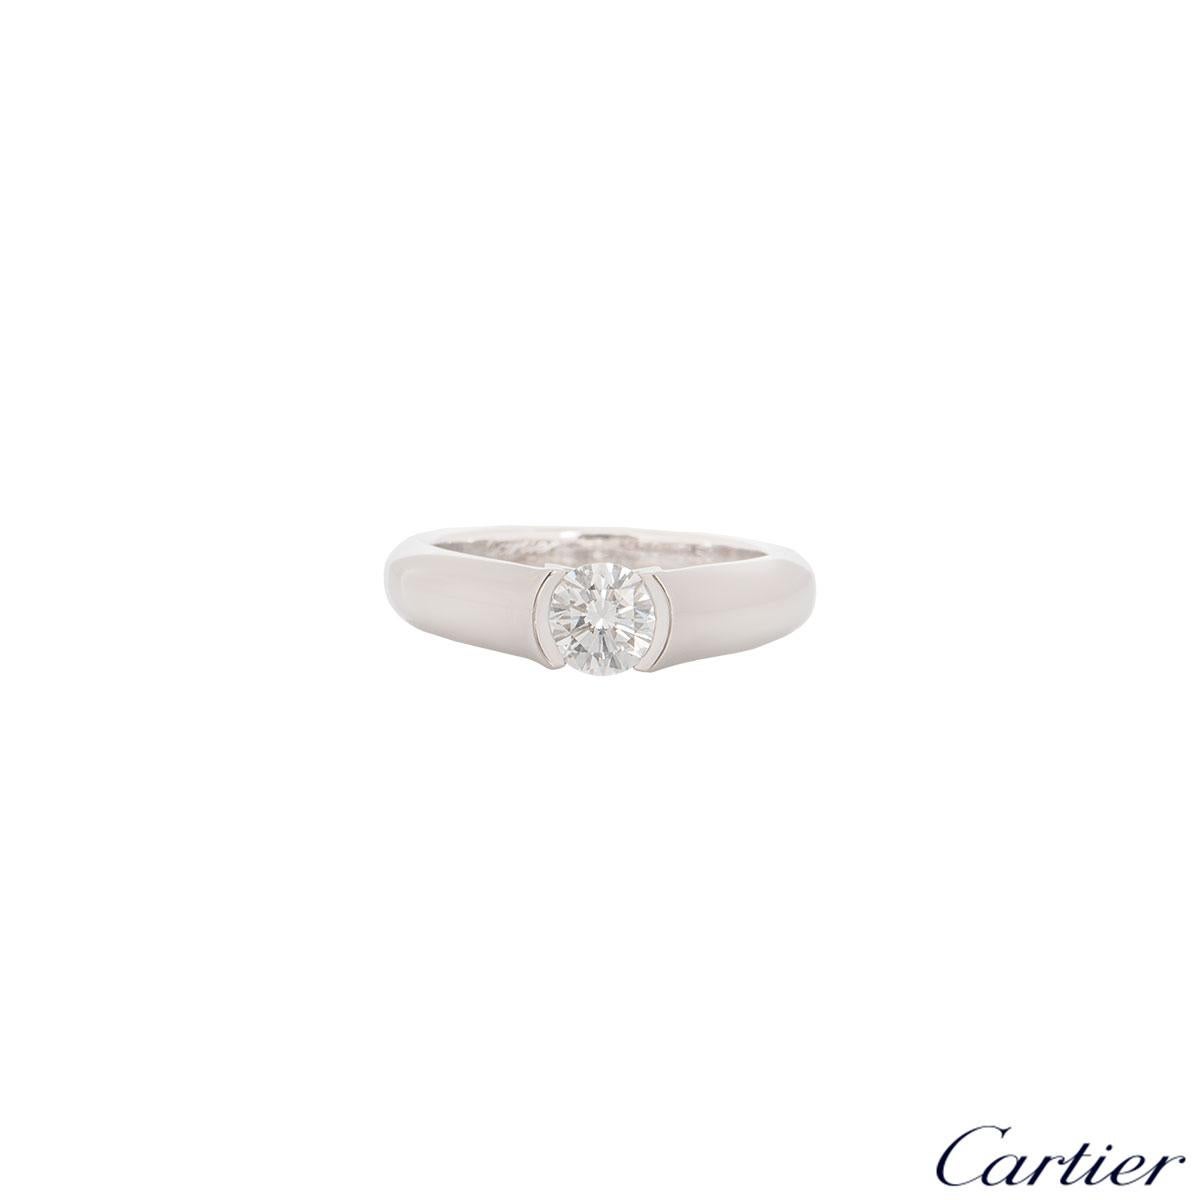 An elegant platinum Cartier diamond engagement ring from the C de Cartier collection. The ring features a round brilliant cut diamond in tension setting with a weight of 0.54ct, G colour and VS1 in clarity. The ring is currently a size UK L, EU 51